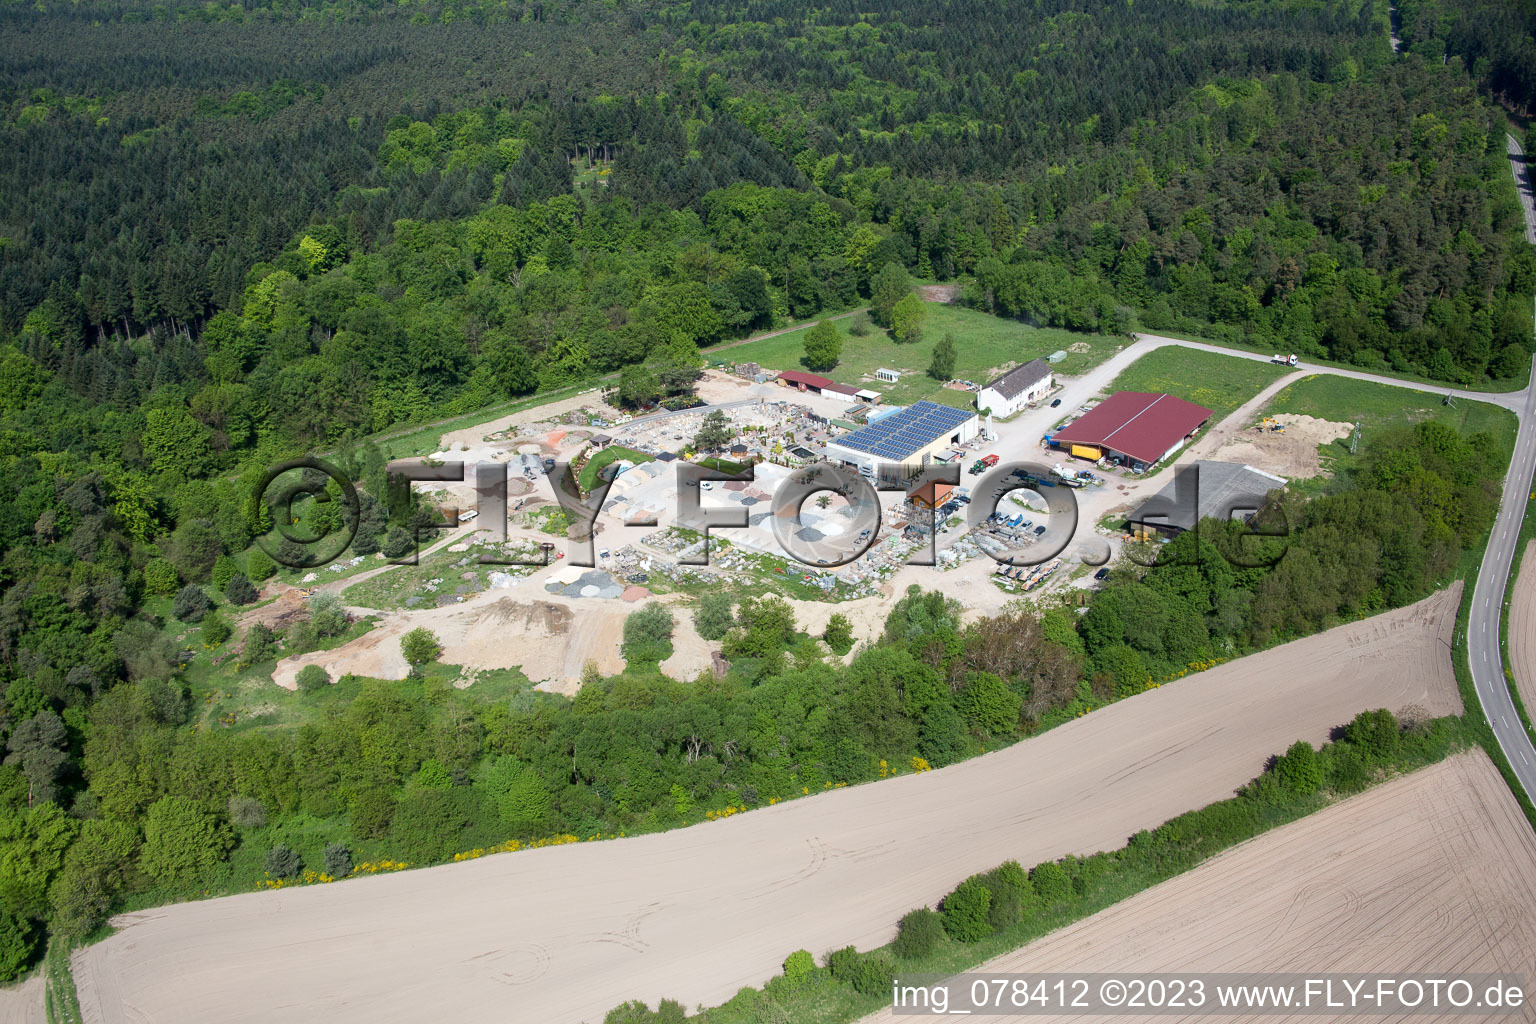 Aerial photograpy of Palatinum landscape and garden design in Hagenbach in the state Rhineland-Palatinate, Germany